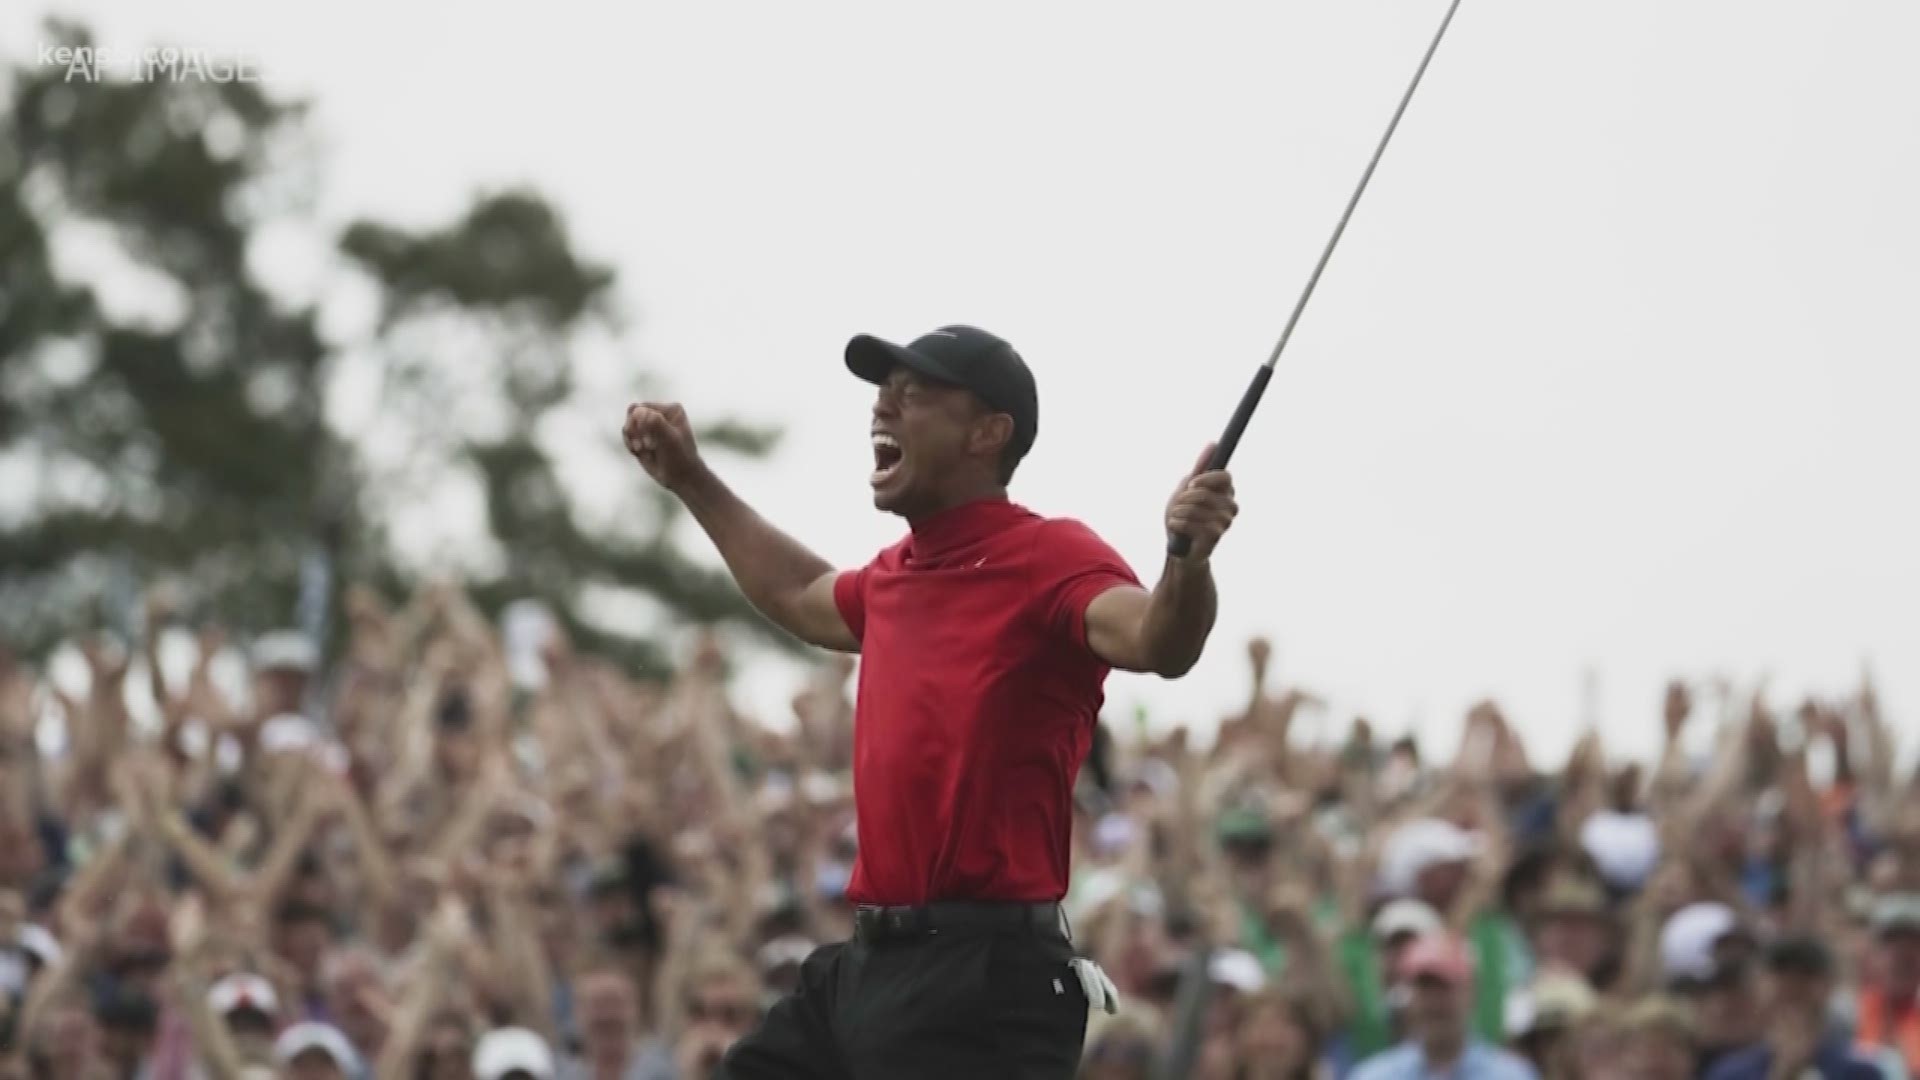 In life, time is undefeated, right? For athletes, a career begins with an unknown timetable and it's that uncertainty as to why the Masters meant so much to so many.